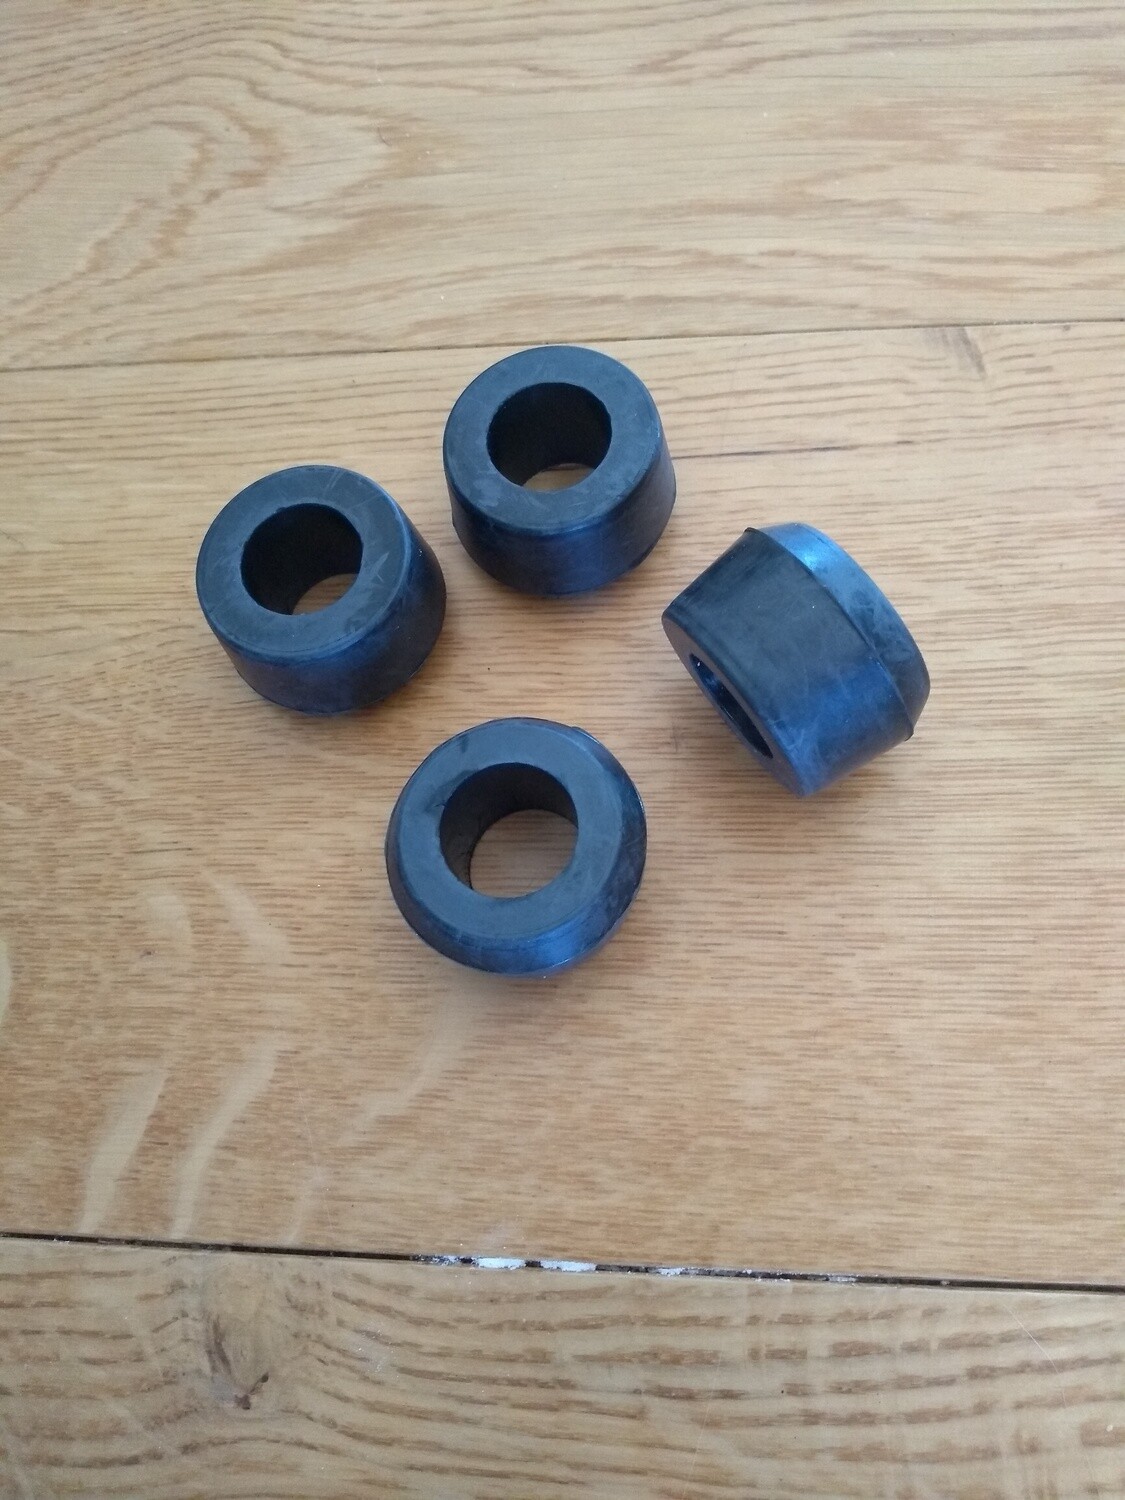 4 Rubber Bushes for Transmission Mounting M530